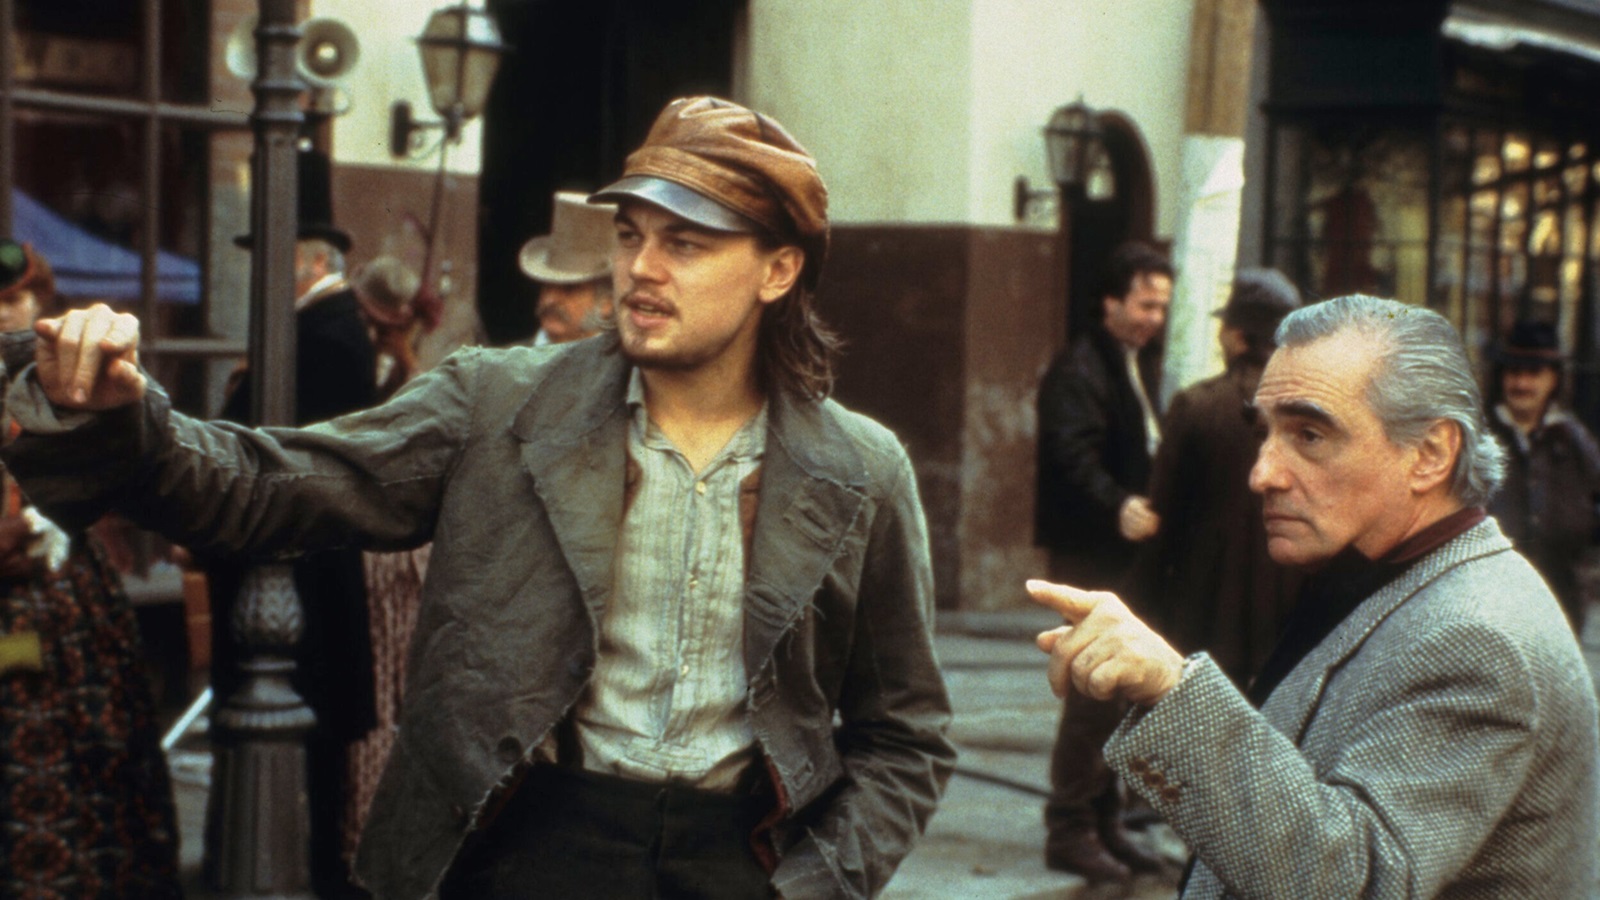 Martin Scorsese was about to leave cinema after Gangs of New York: 'I couldn't work that way'